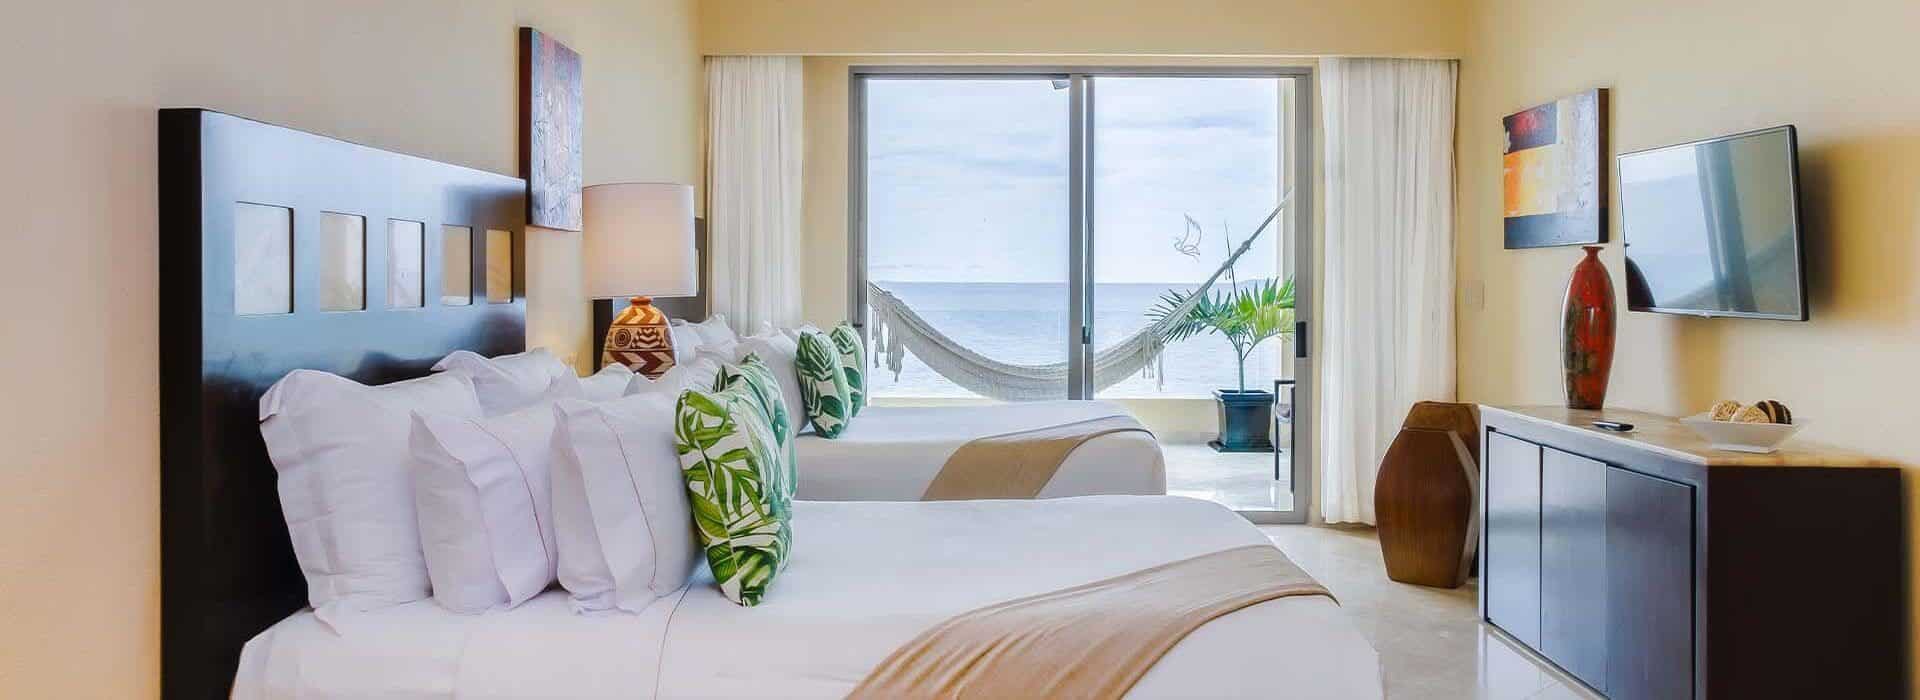 A bedroom with 2 Queen beds with white, tan and green bedding, dark wood headboard, a leather armchair, a dresser and Flat Screen TV on the opposite wall, and sliding doors leading out to a balcony with a hammock and ocean views.